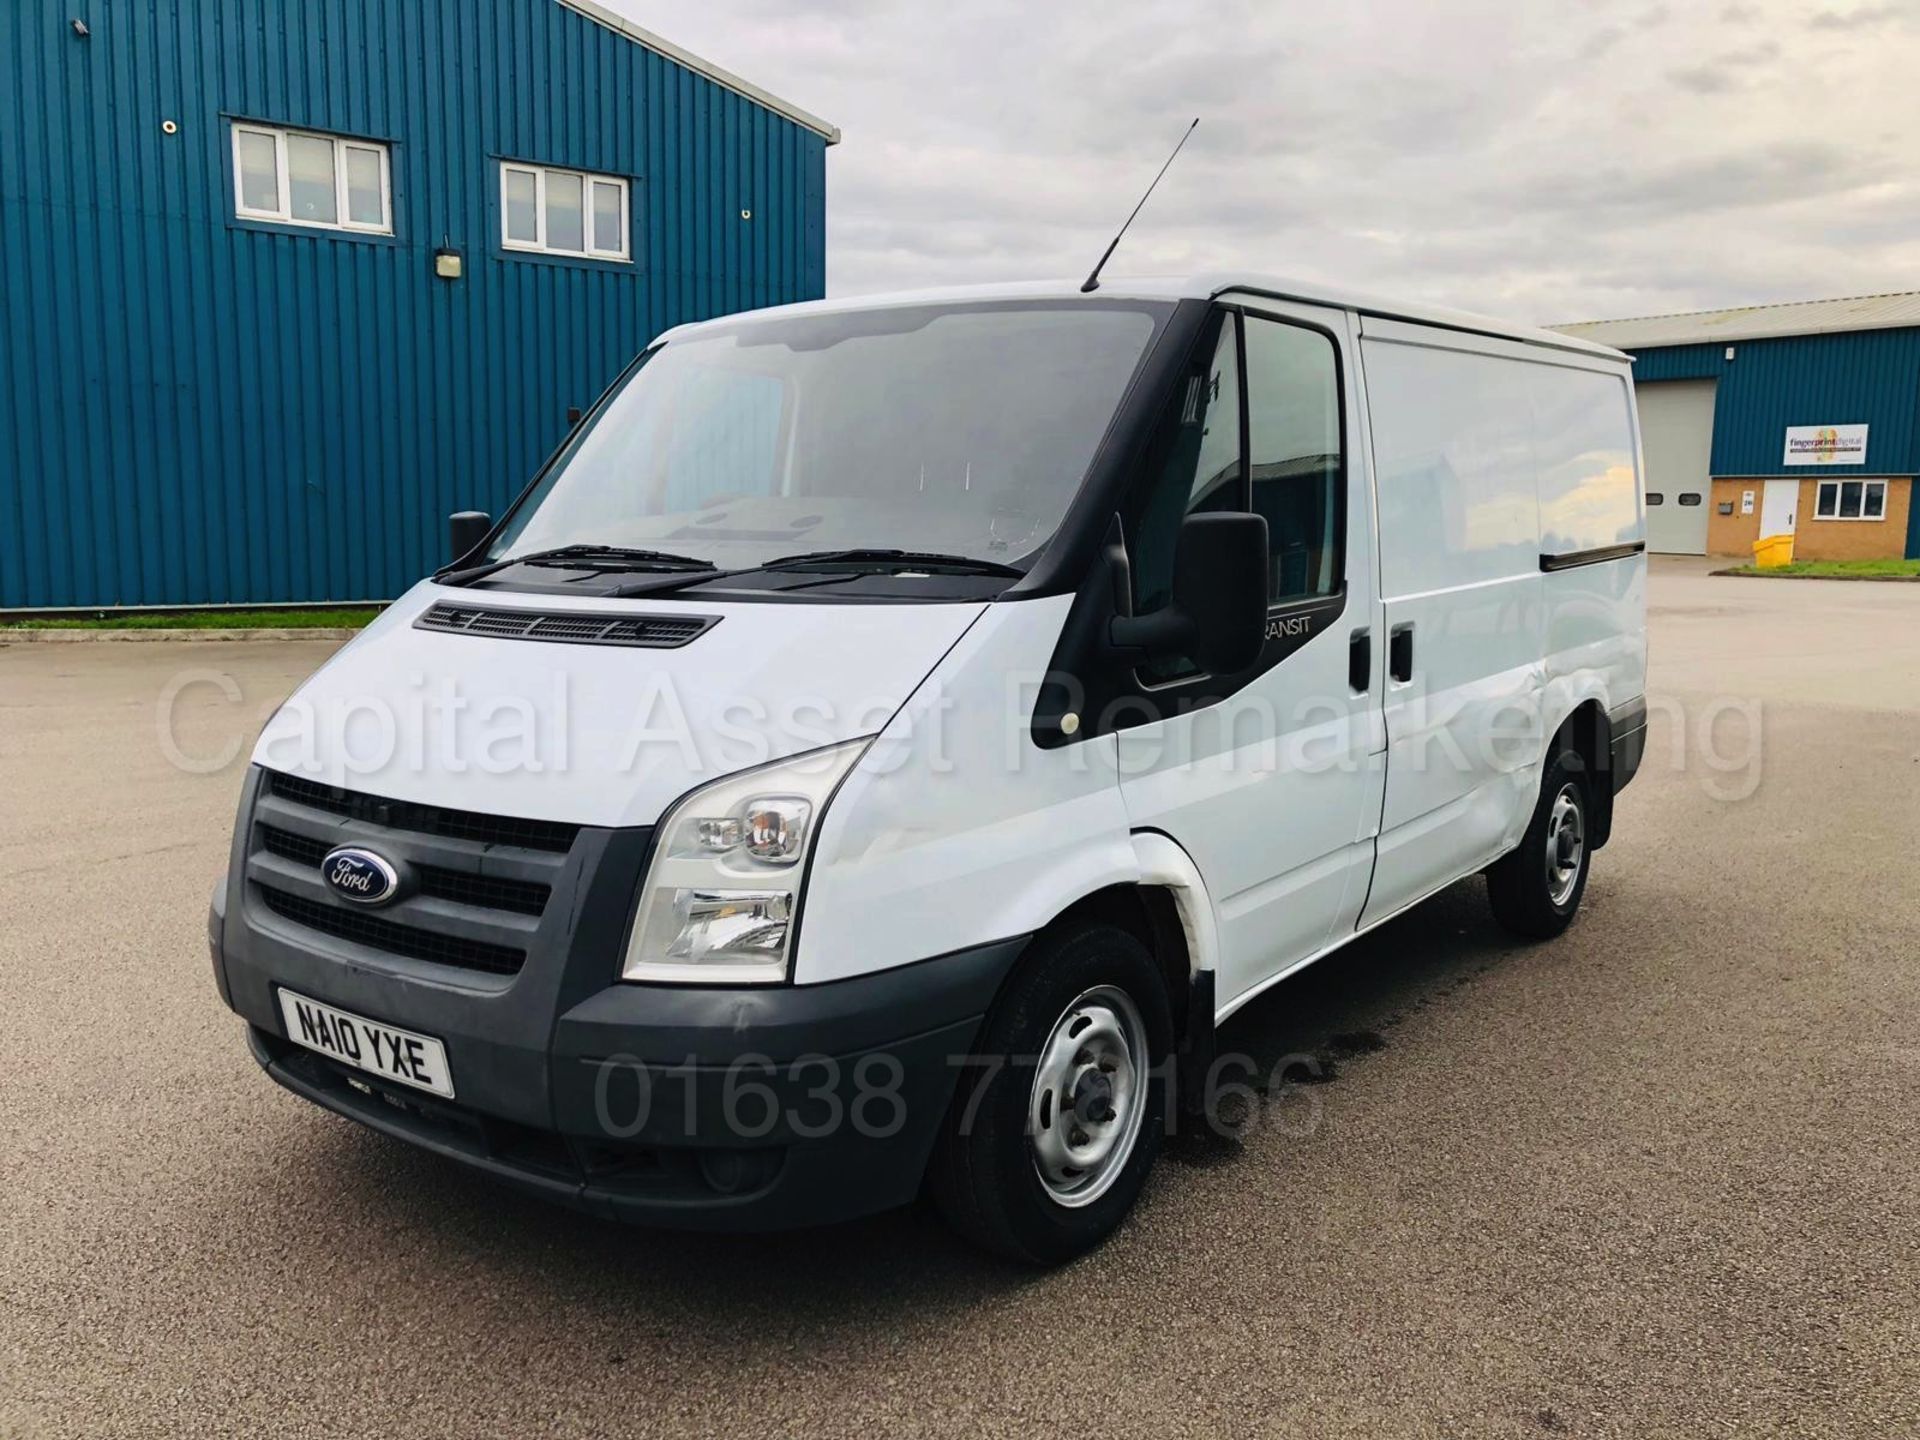 (On Sale) FORD TRANSIT 85 T280 FWD *SWB - PANEL VAN* (2010) '2.2 TDCI - 85 BHP - 5 SPEED' *AIR CON* - Image 3 of 20